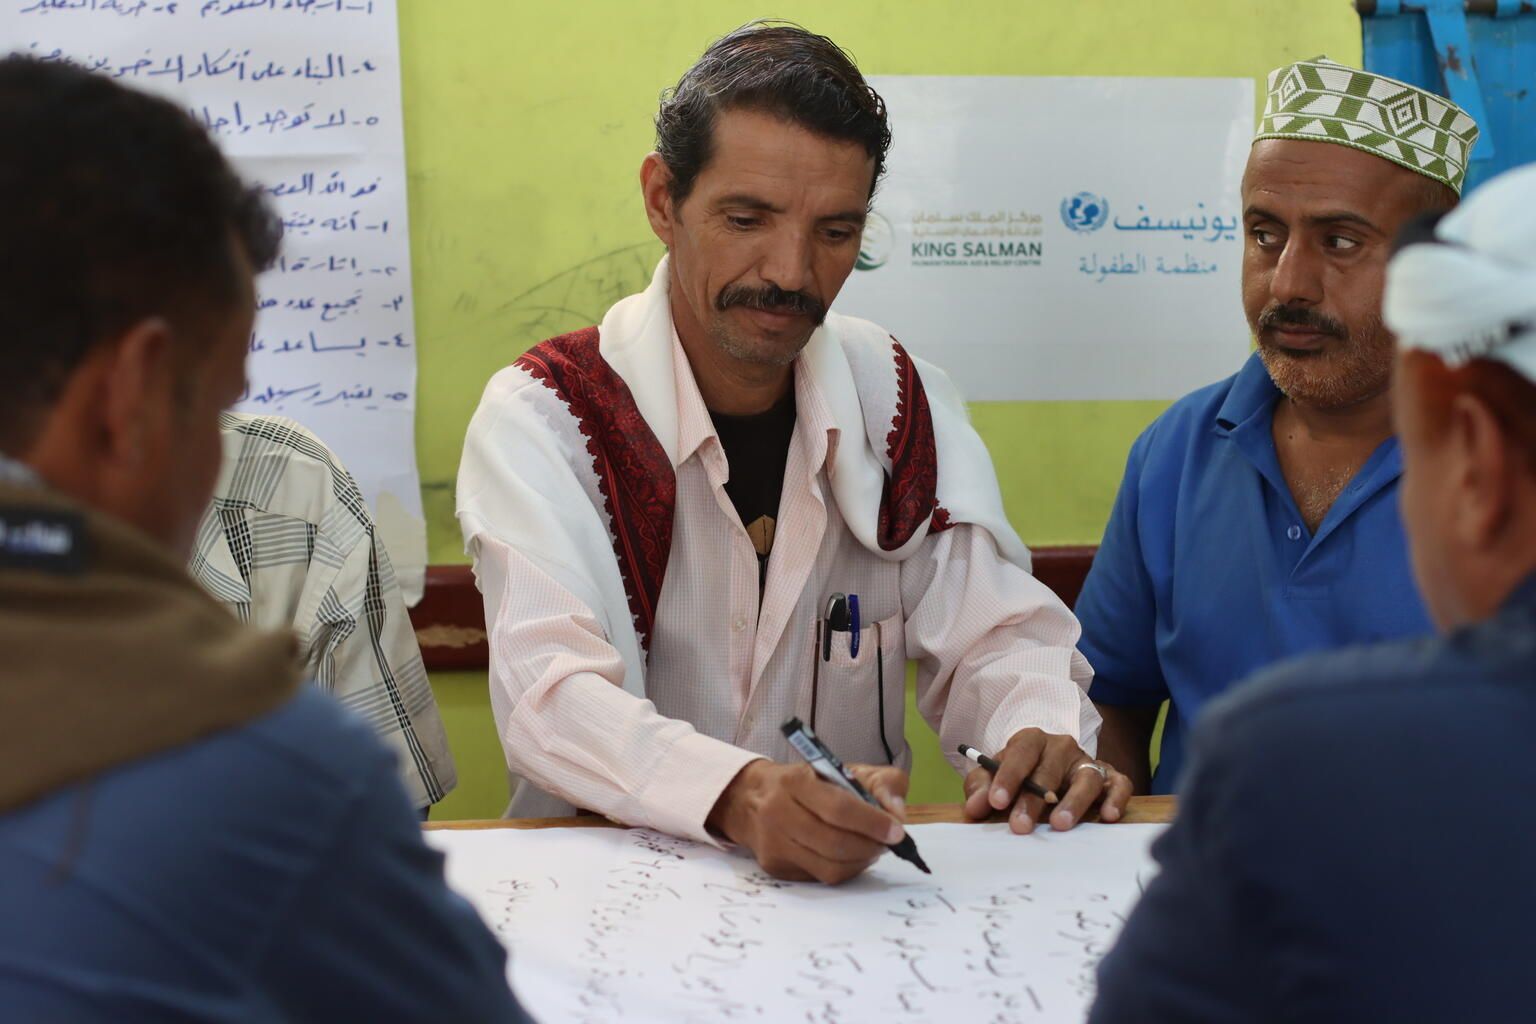 Training Program by UNICEF Concludes in Lahj Governorate